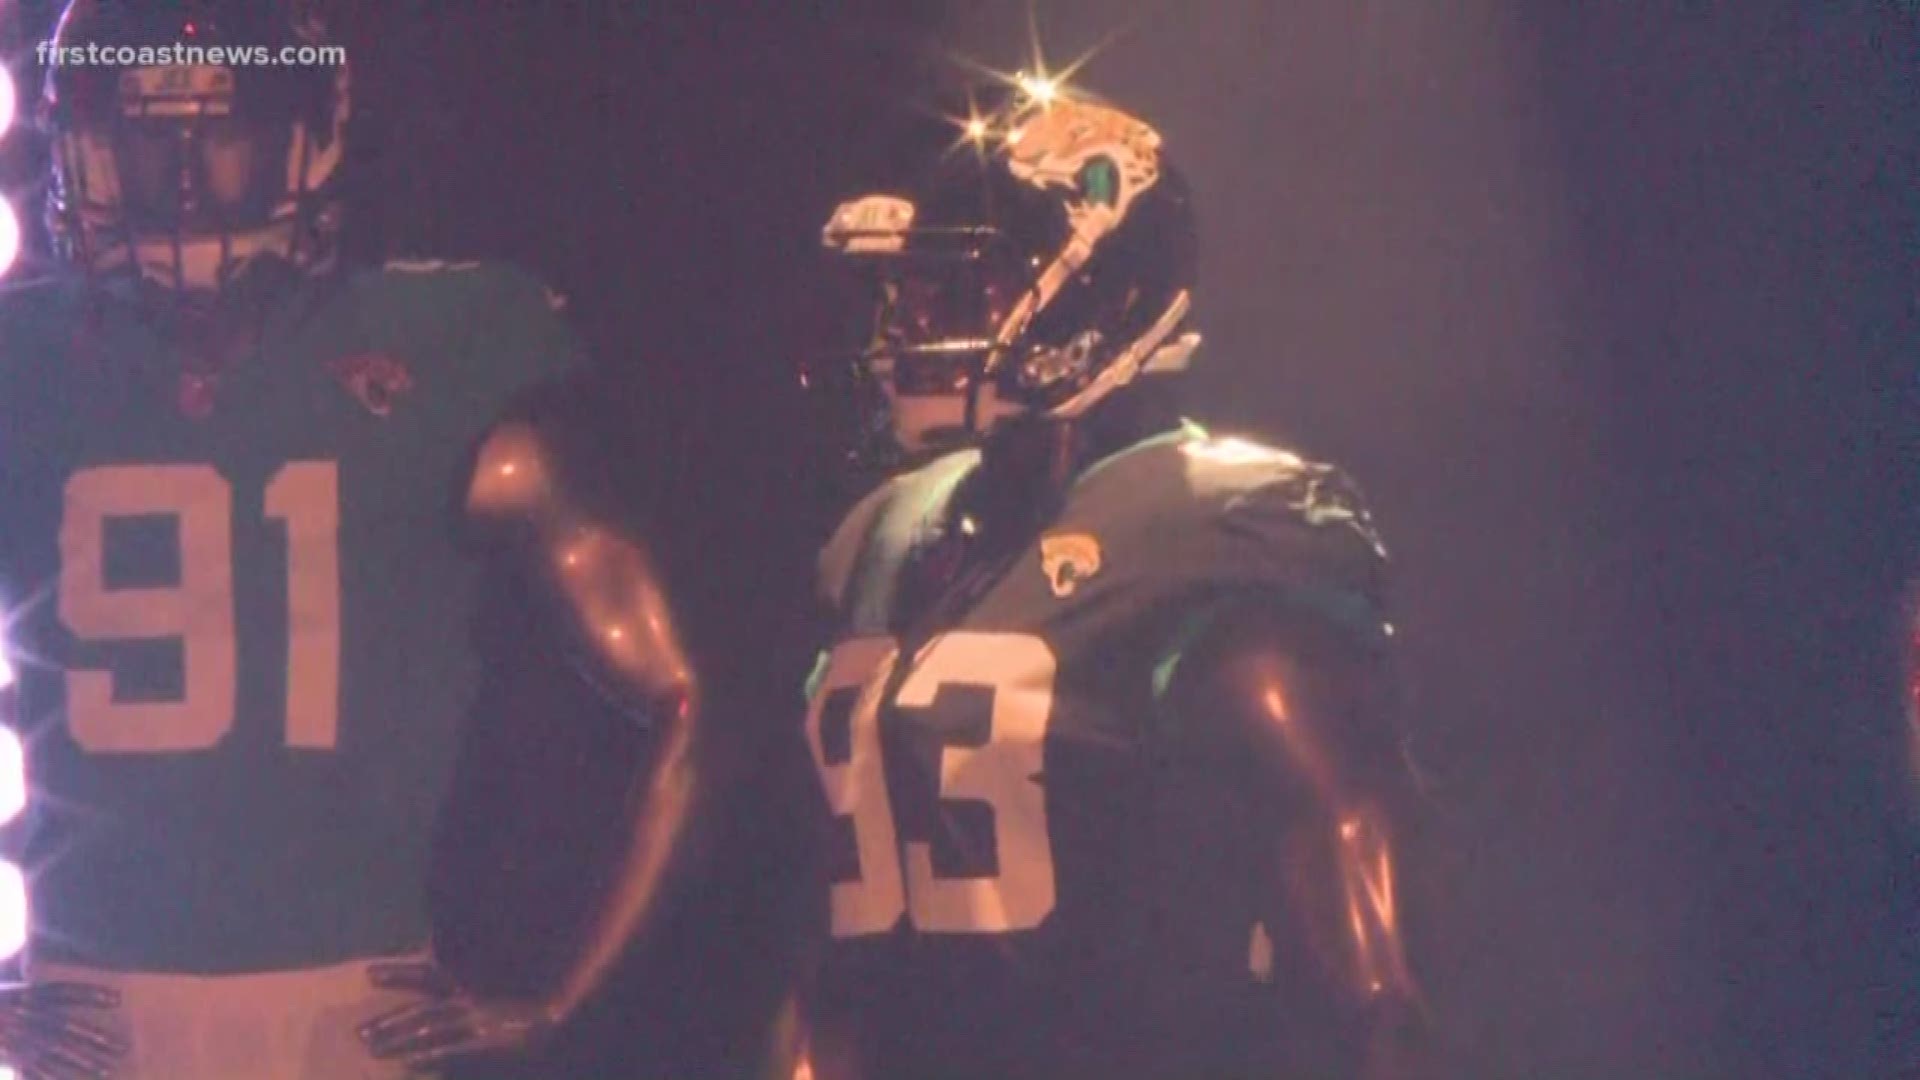 Jaguars unveil new uniforms at annual State of the Franchise event.